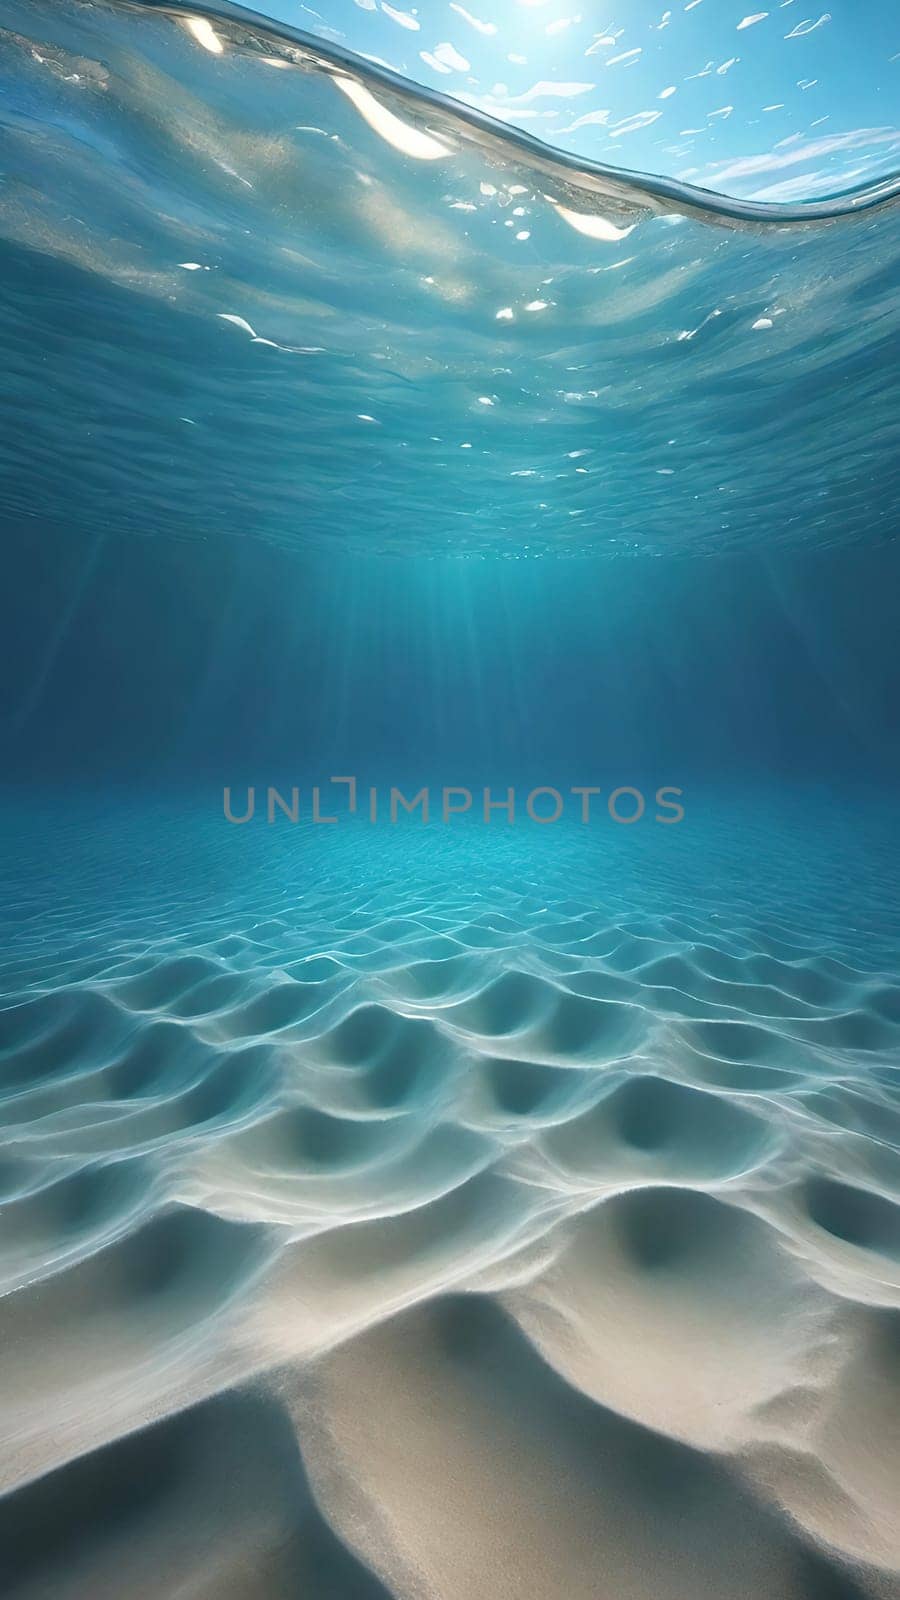 Underwater world. 3d render illustration.Underwater view of the sea with waves and sand.